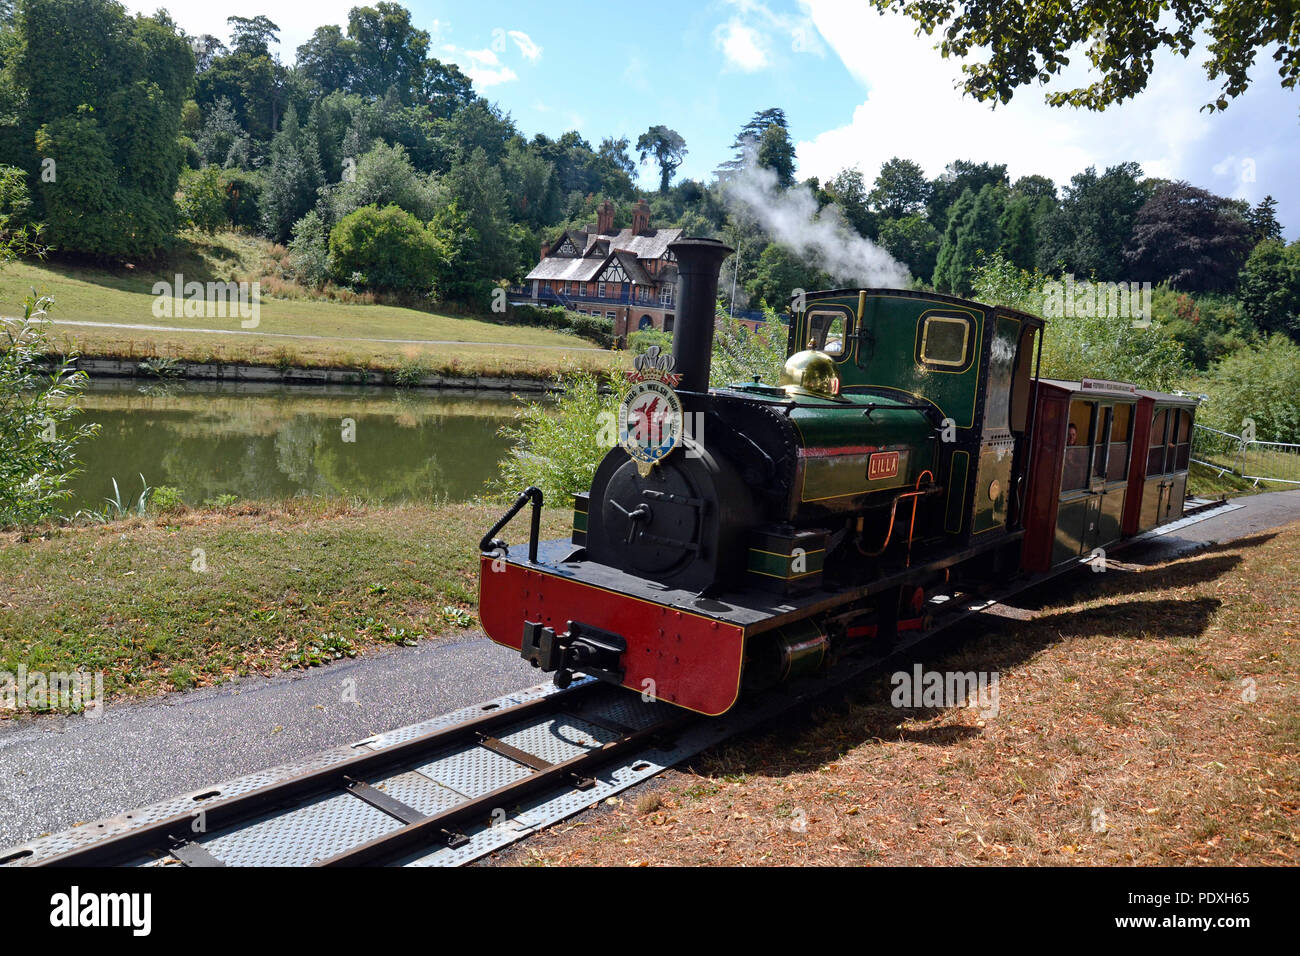 Steam train from the Ffestiniog and Welsh Highland Railway at Shrewsbury Flower Show Welsh railway exhibiting at flower show. free rides Credit: Susie Kearley/Alamy Live News Stock Photo